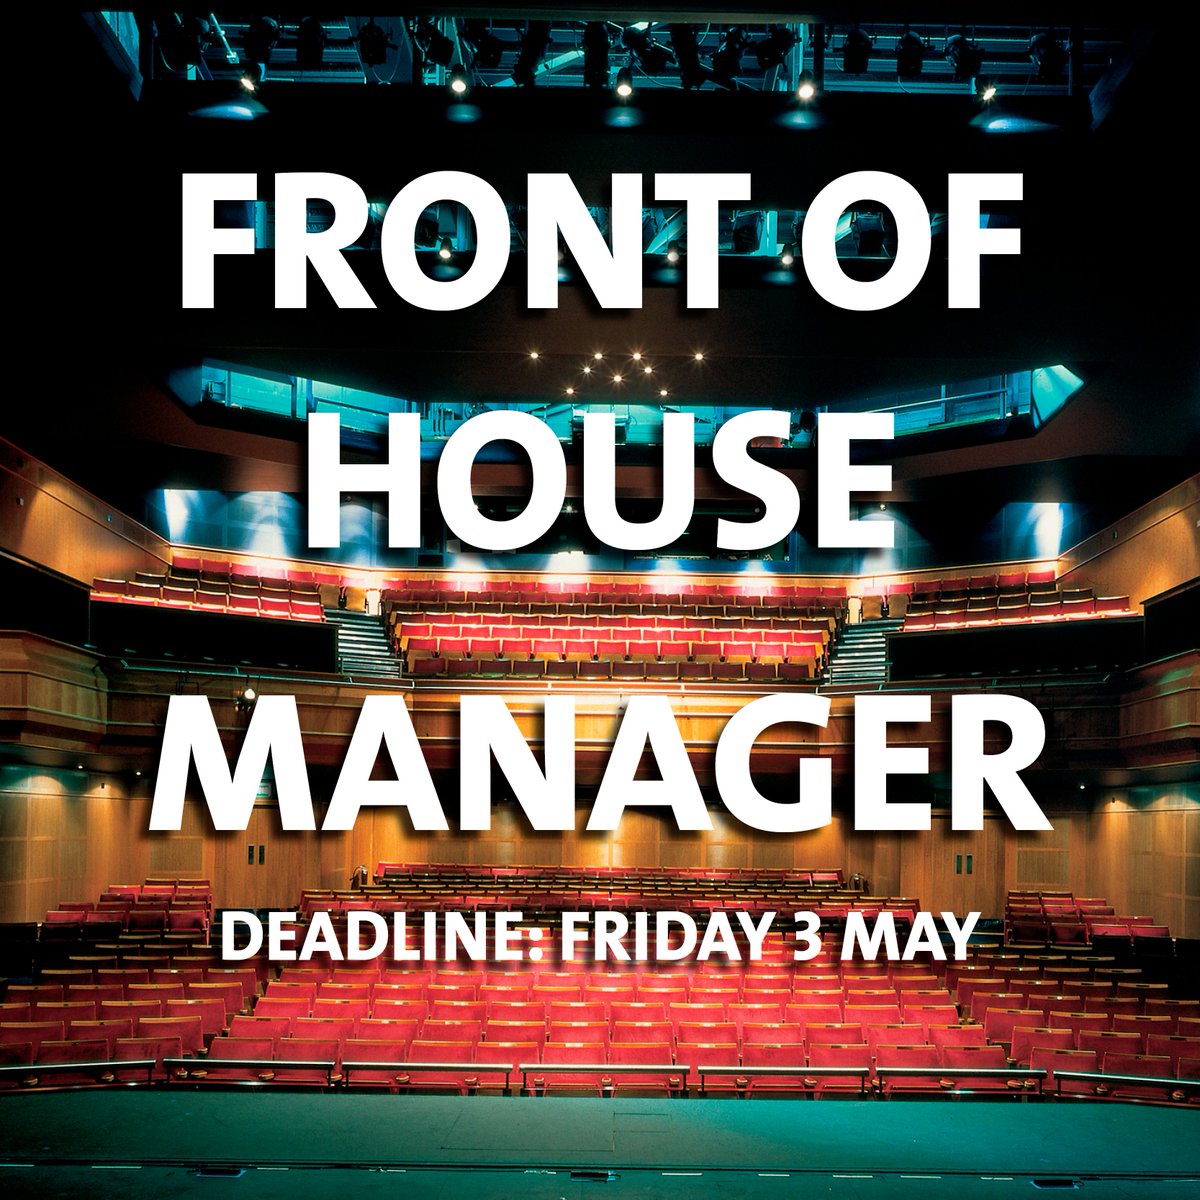 We're hiring! 📣 We are looking for a Front of House Manager to lead our fantastic FoH team of volunteers, casual staff, Duty Managers and the Assistant Theatre Manager. Click here for more info and how to apply: shorturl.at/fvMN8 #artsjobs